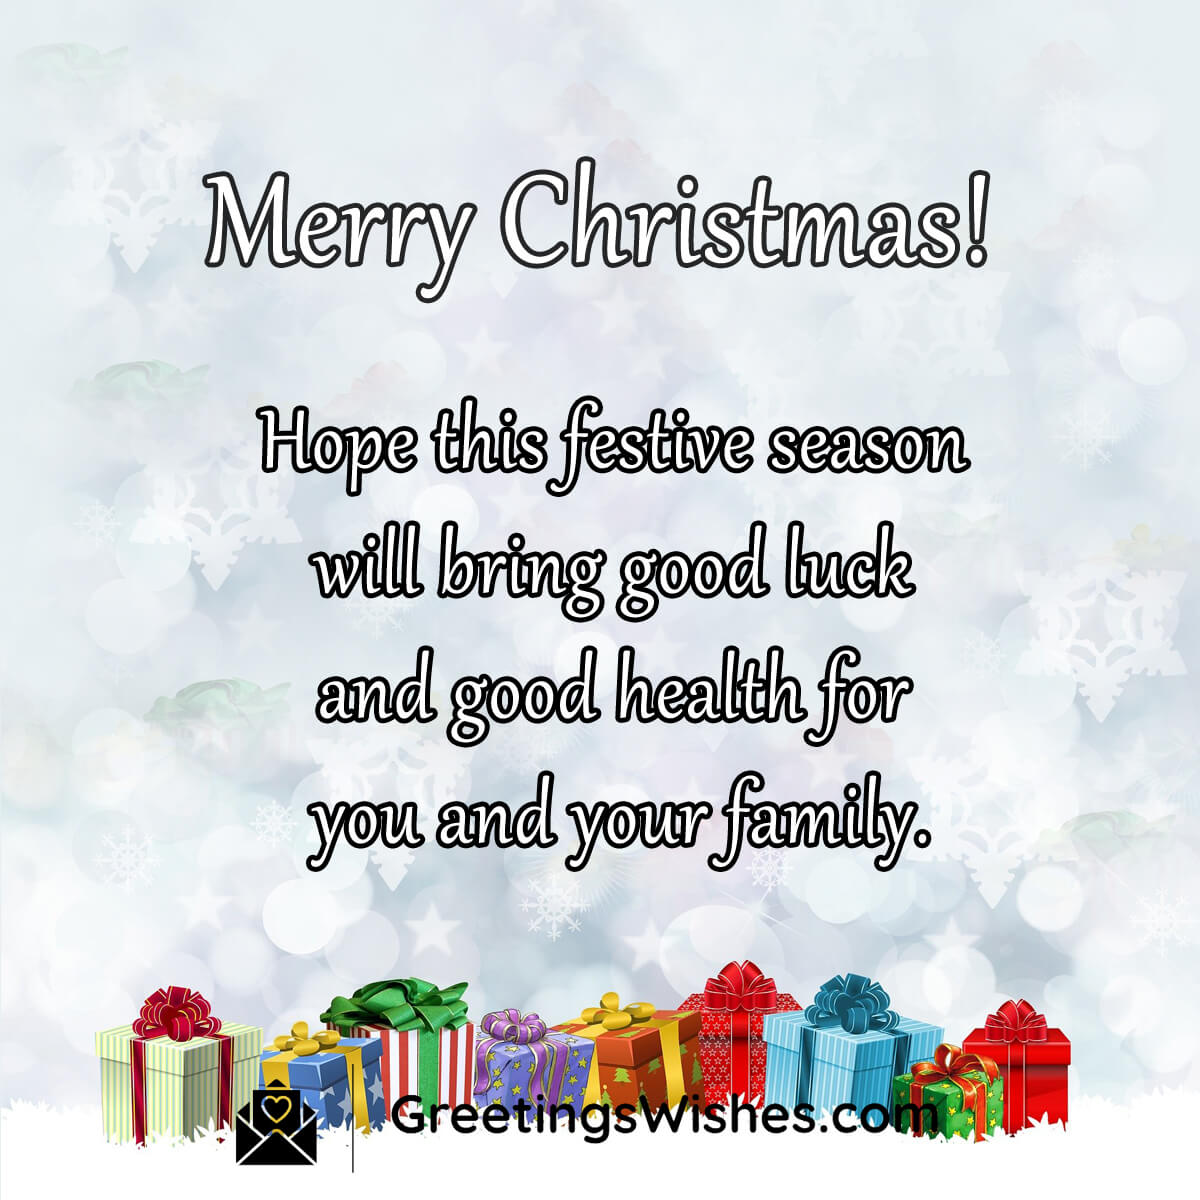 Merry Christmas Greetings (25th December) - Greetings Wishes